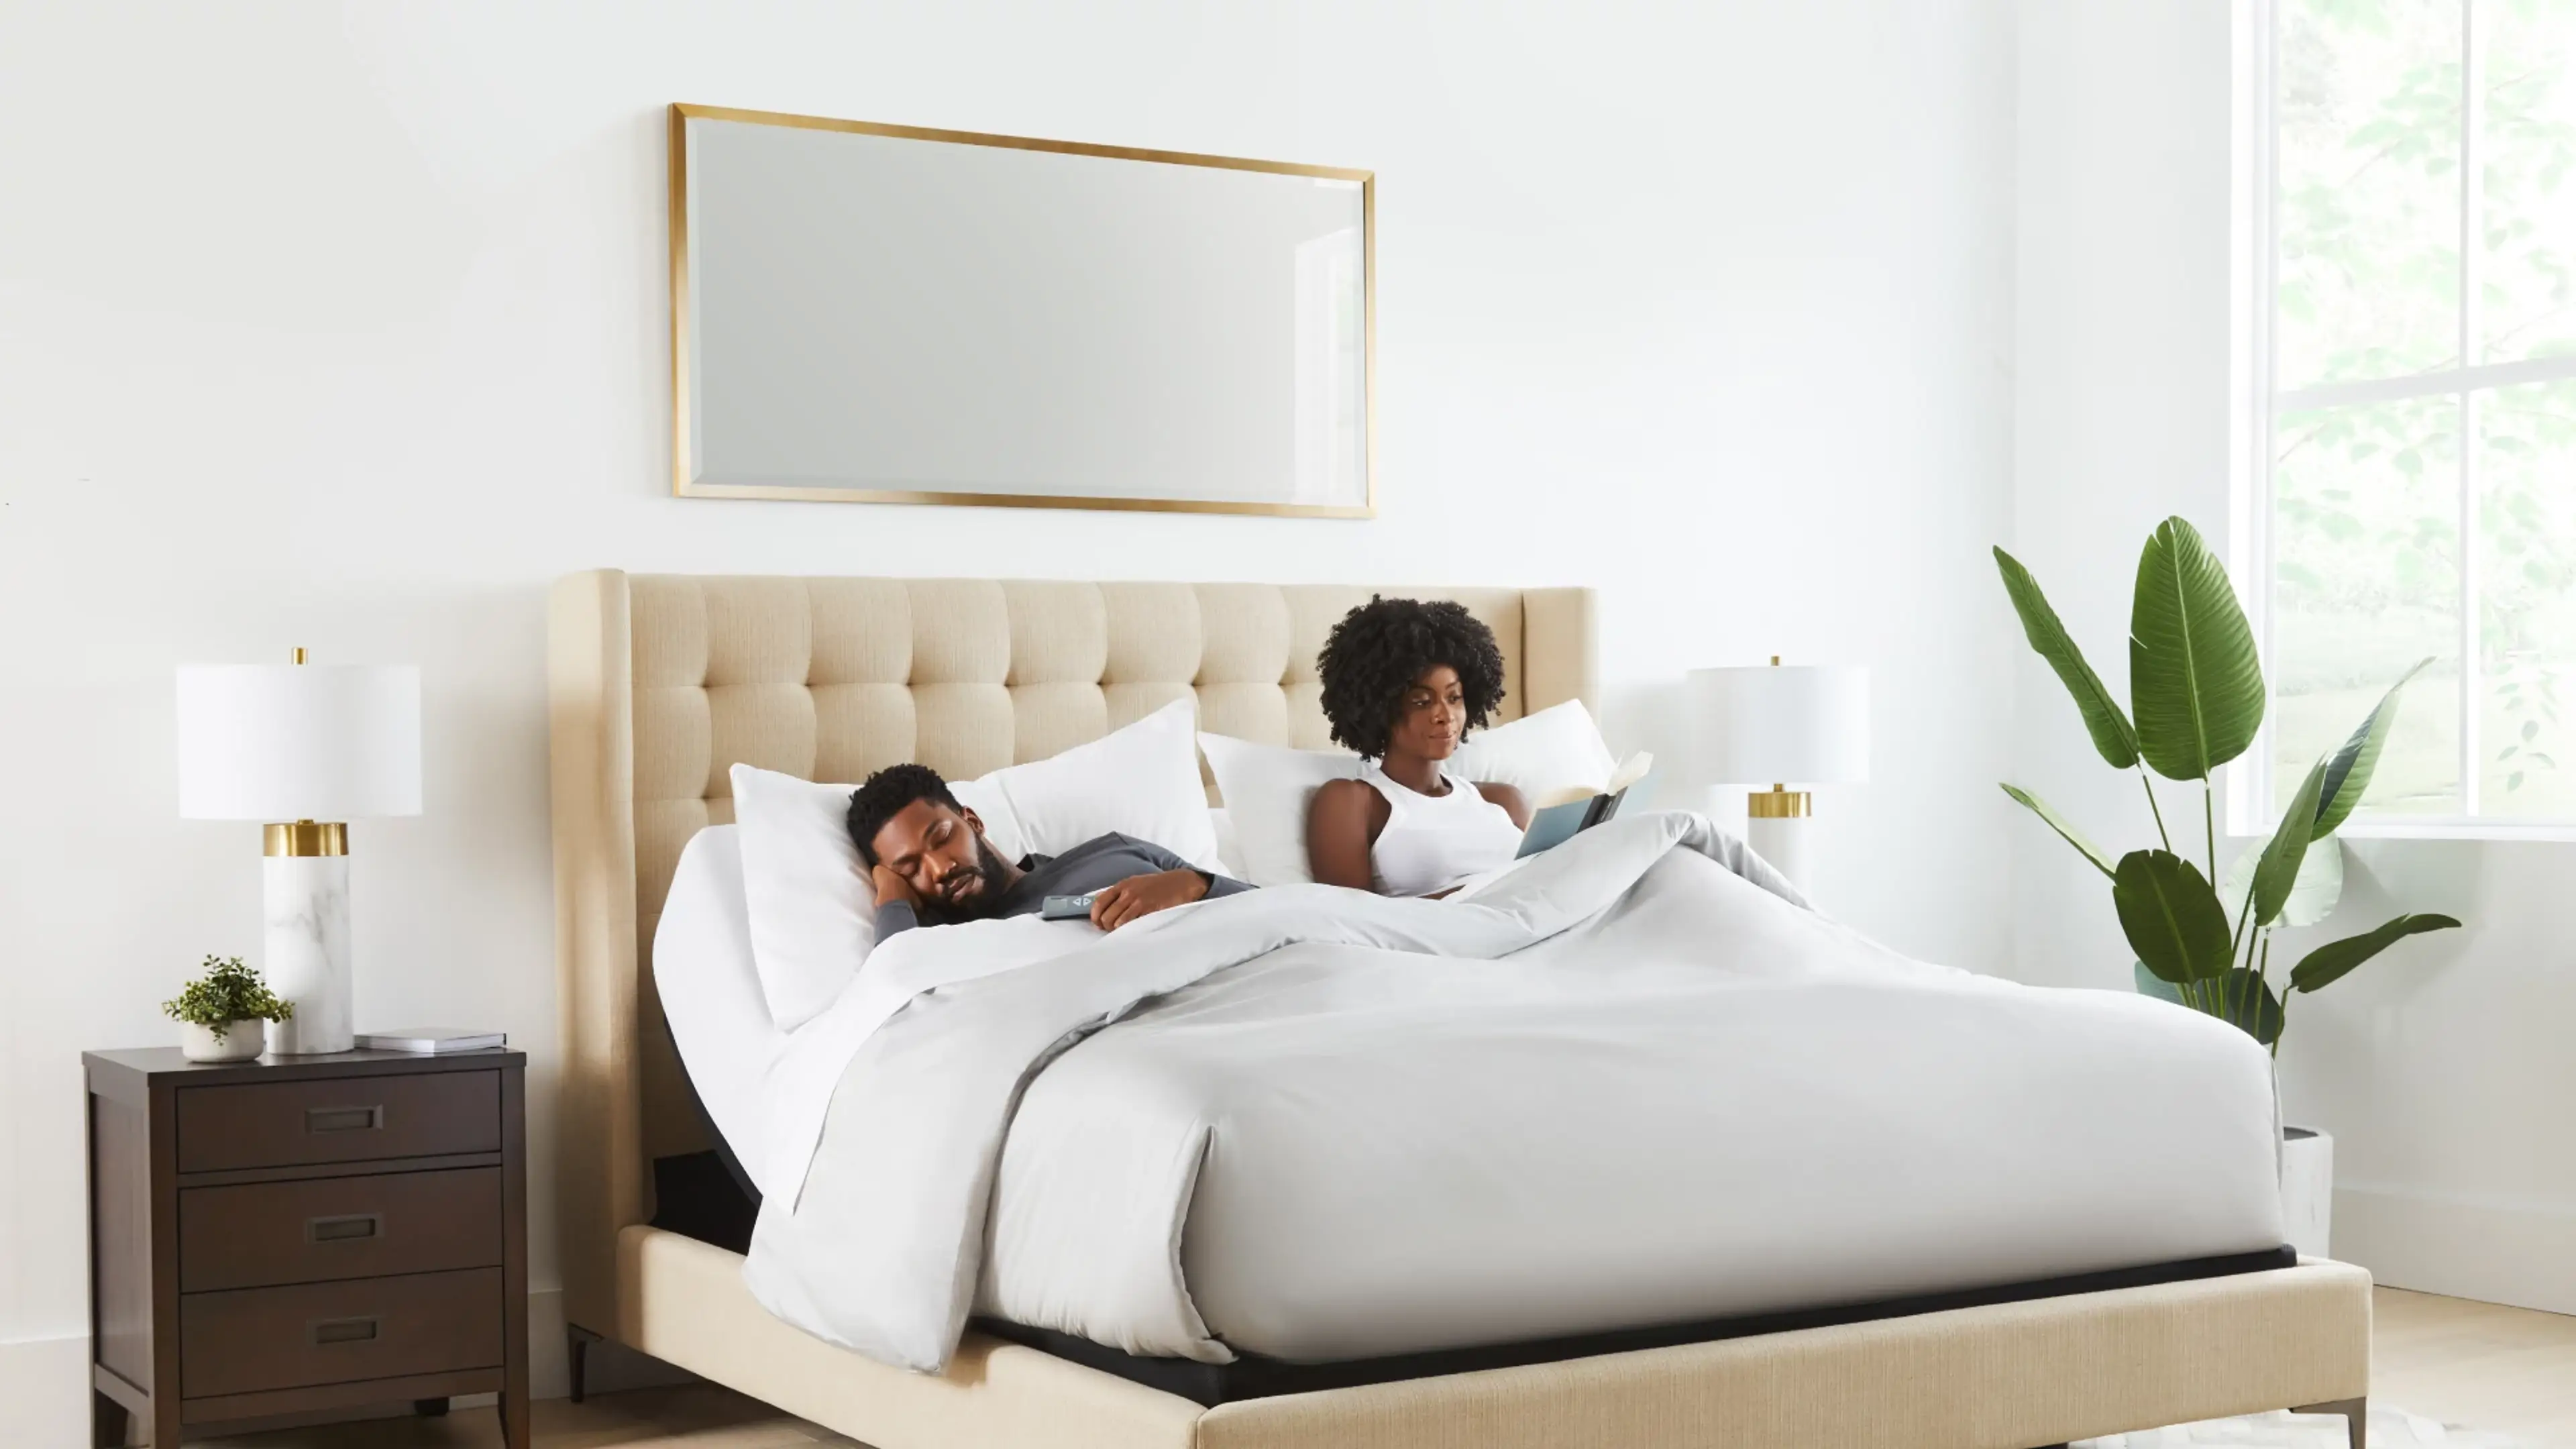 Save up to $700 on your favorite mattress brands.